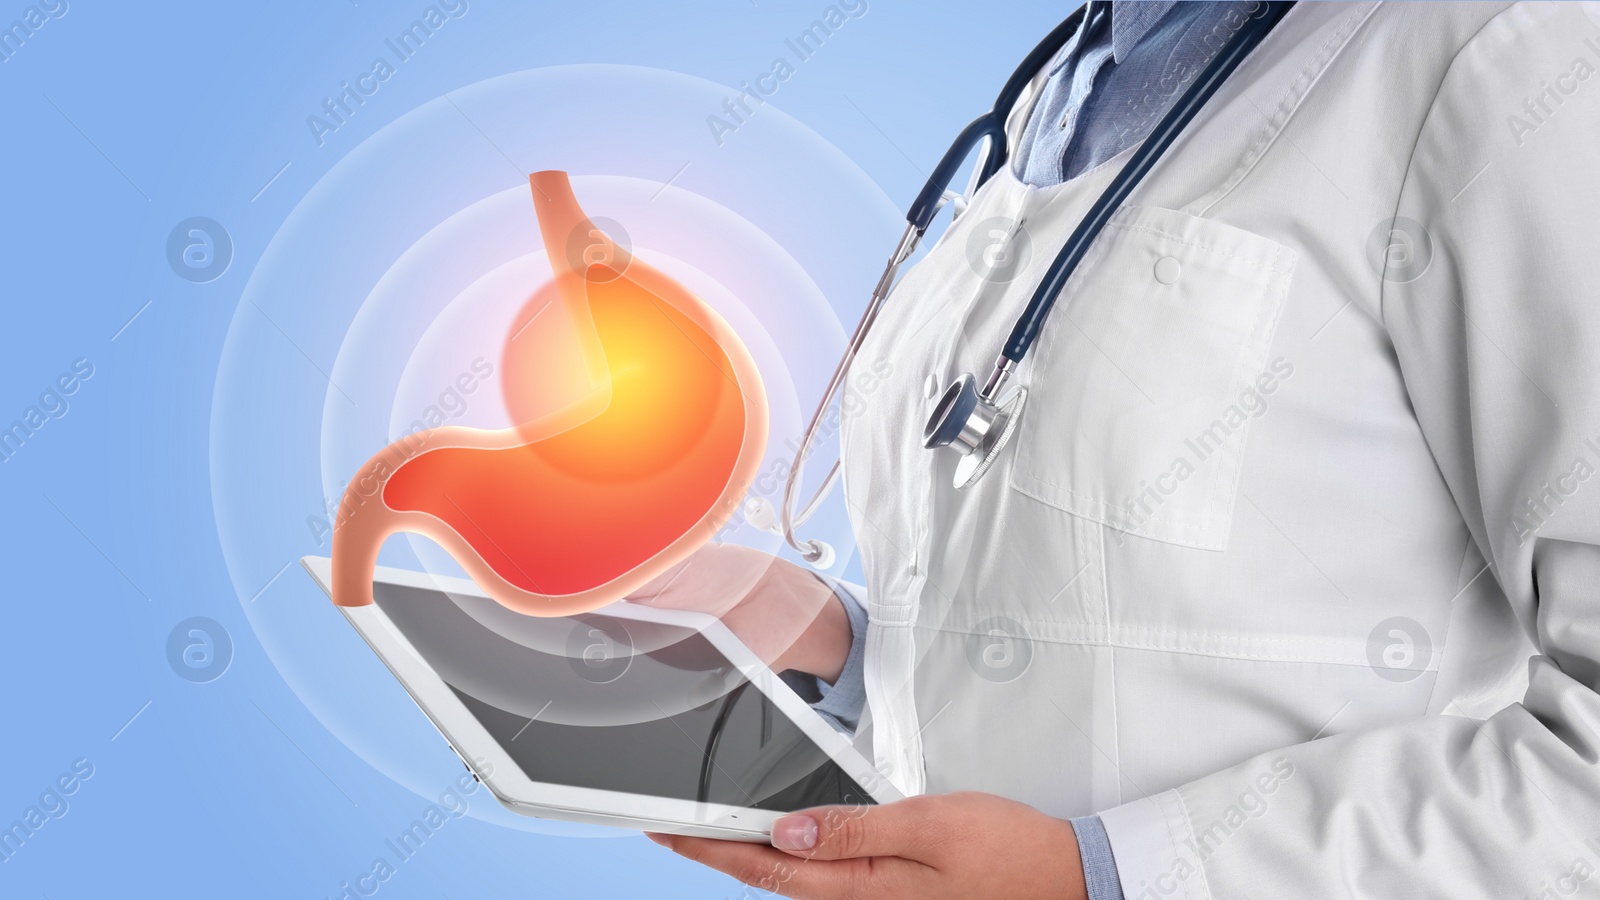 Image of Treatment of heartburn and other gastrointestinal diseases. Doctor using tablet on light blue background, closeup. Stomach illustration over device